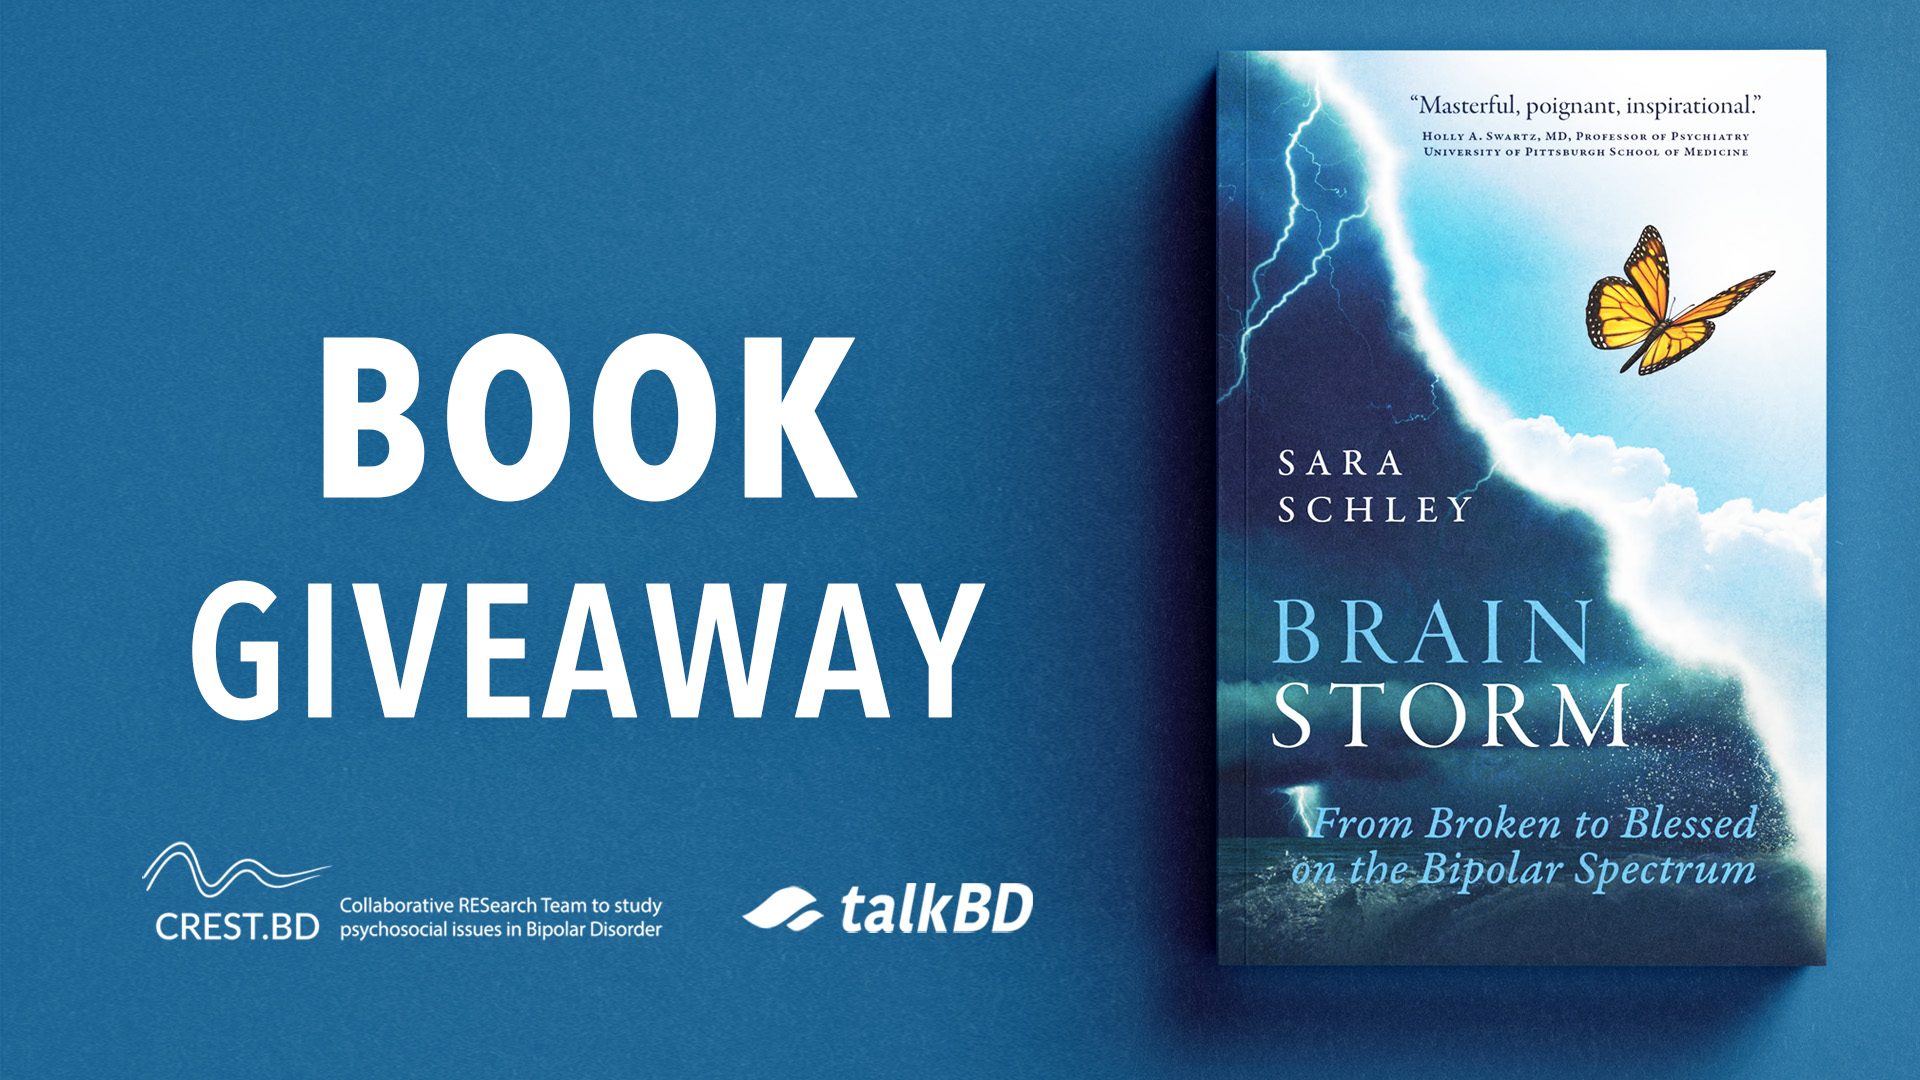 We’re Giving Away 5 Copies of “BrainStorm: From Broken to Blessed on the Bipolar Spectrum”!